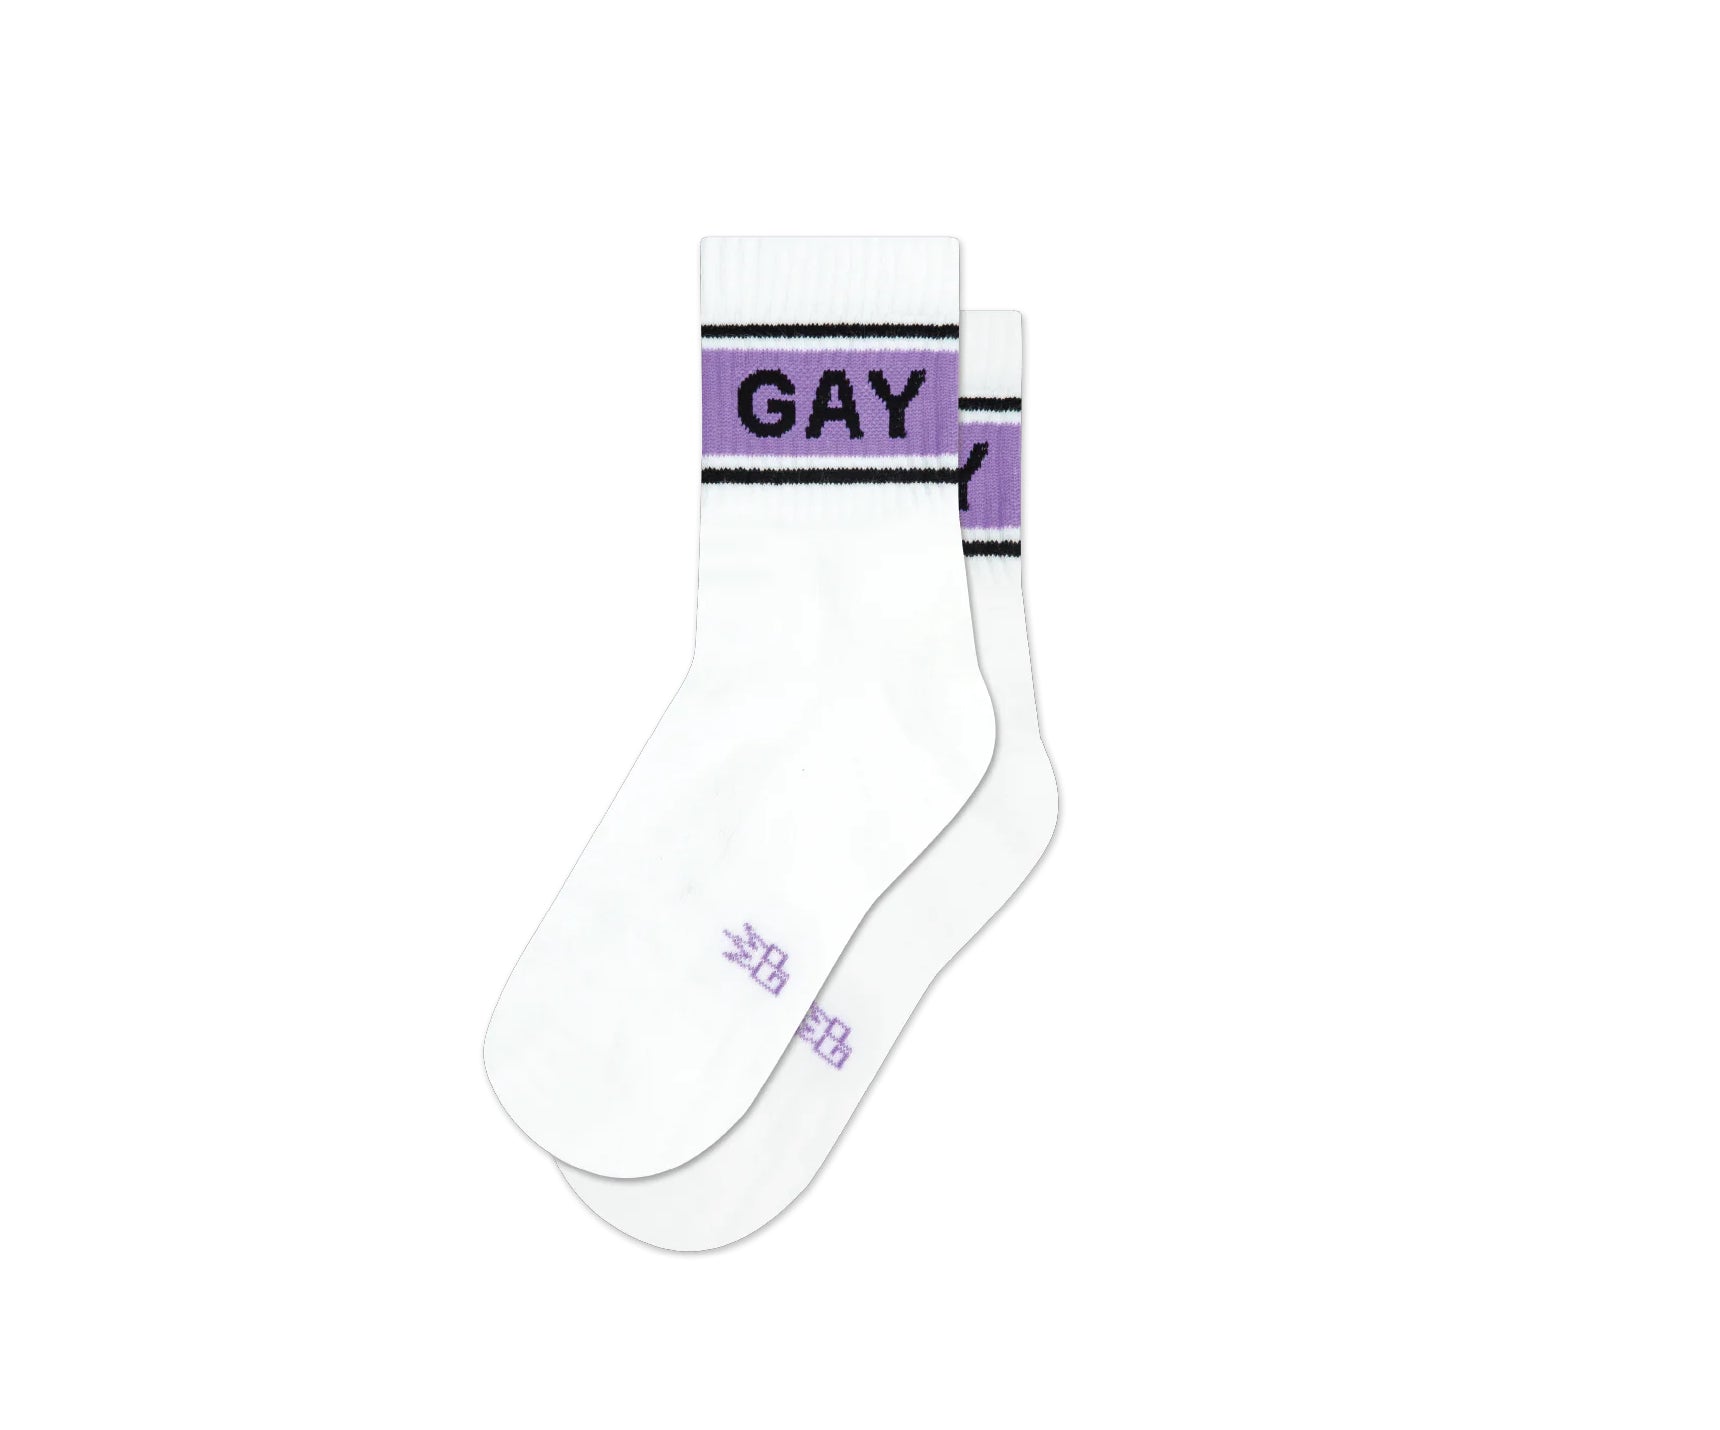 A pair of white and purple quarter-crew socks that read "Gay" with the Gumball Poodle logo along the arch.